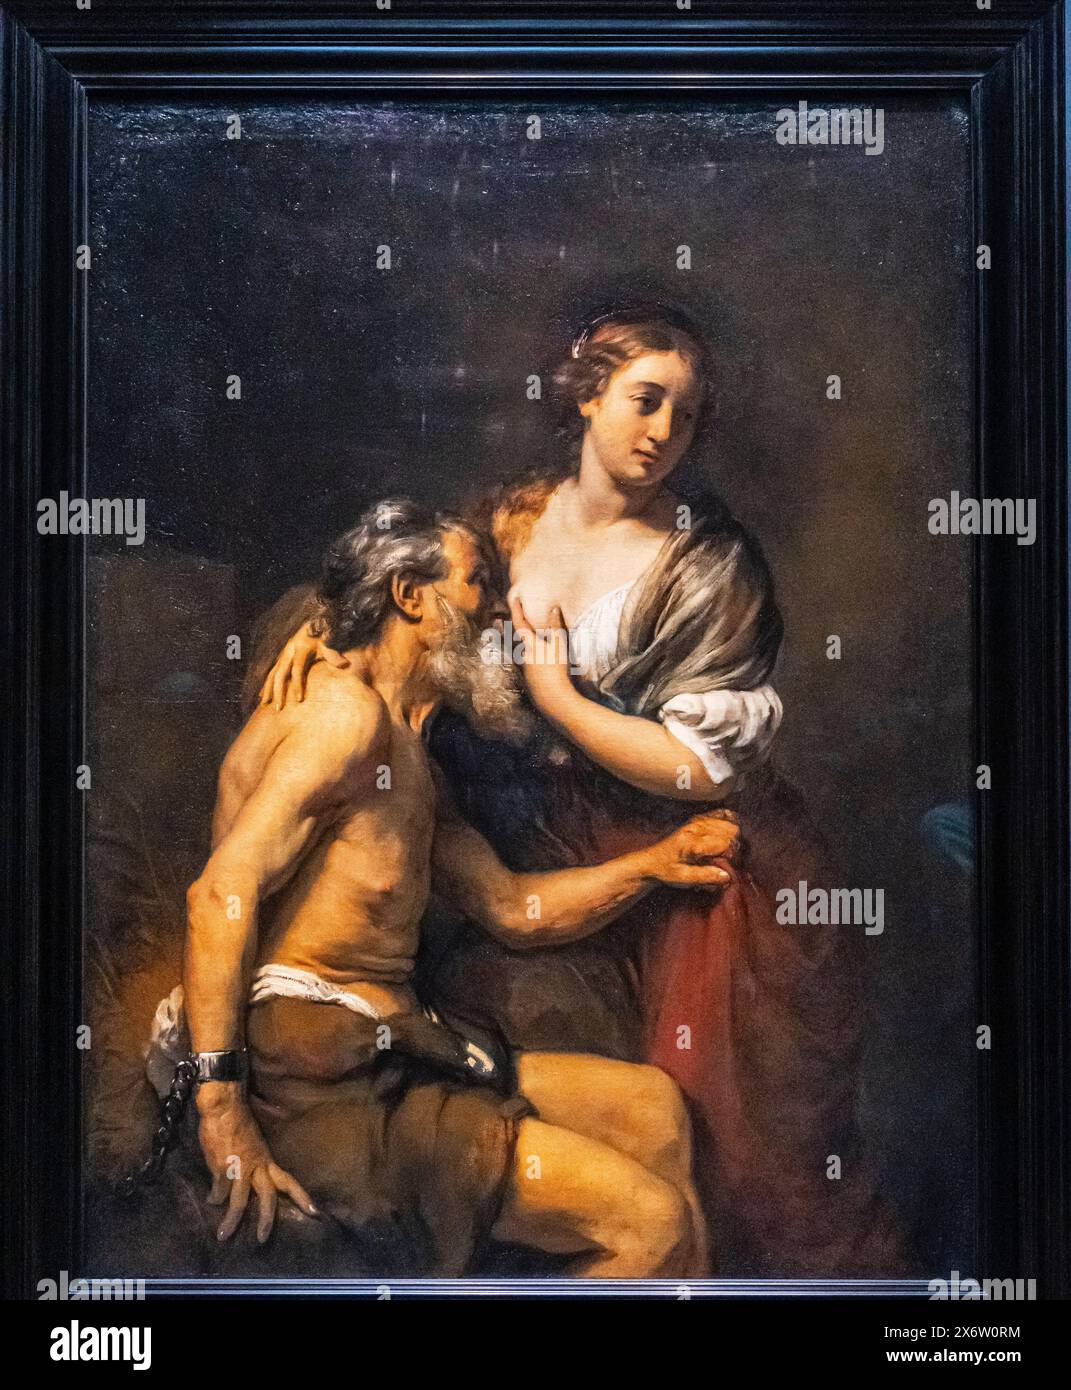 Cimon and Pero, at. Willlem Drost, oil on canvas, 1656-57, Amsterdam, Netherlands. Stock Photo